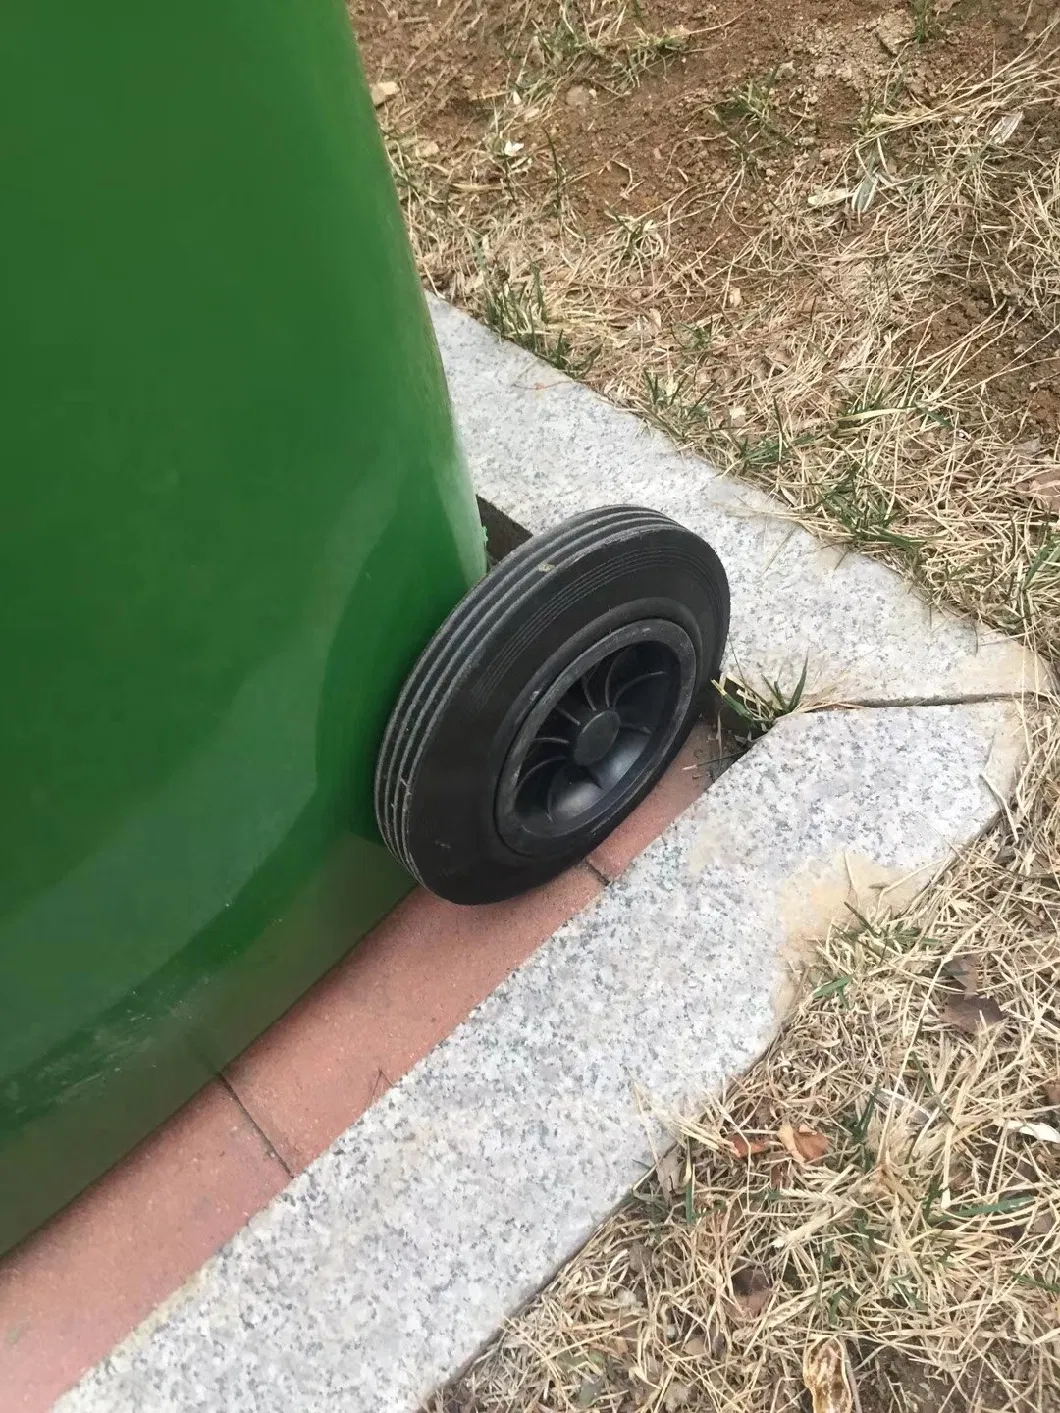 8 6 Inch Flat Free PU Foam Wheel and Solid Powder Rubber Caster Wheel for Garbage Can Dust Waste Trash Container Bin